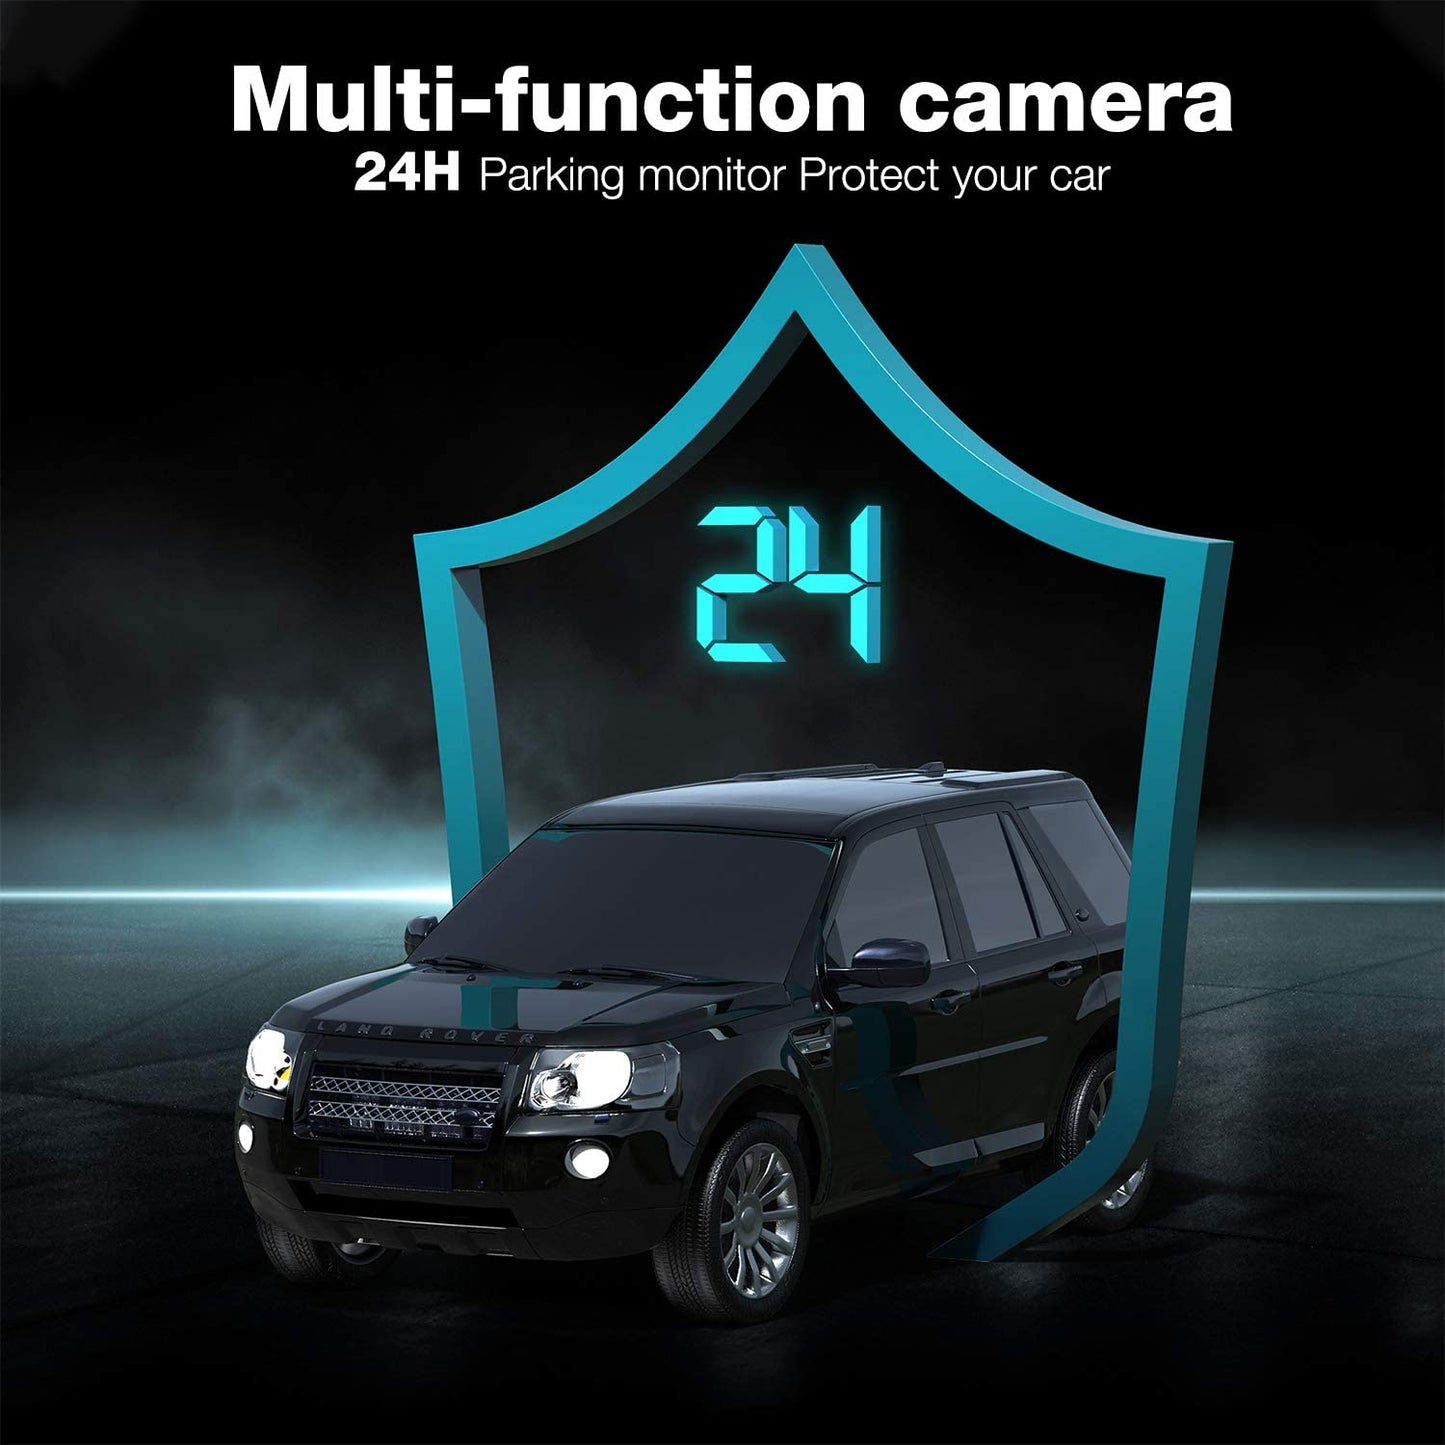 Campark DC35 Dual 1080P Dash Cam w/GPS,  Front and Inside Car Camera w/Infrared Night Vision